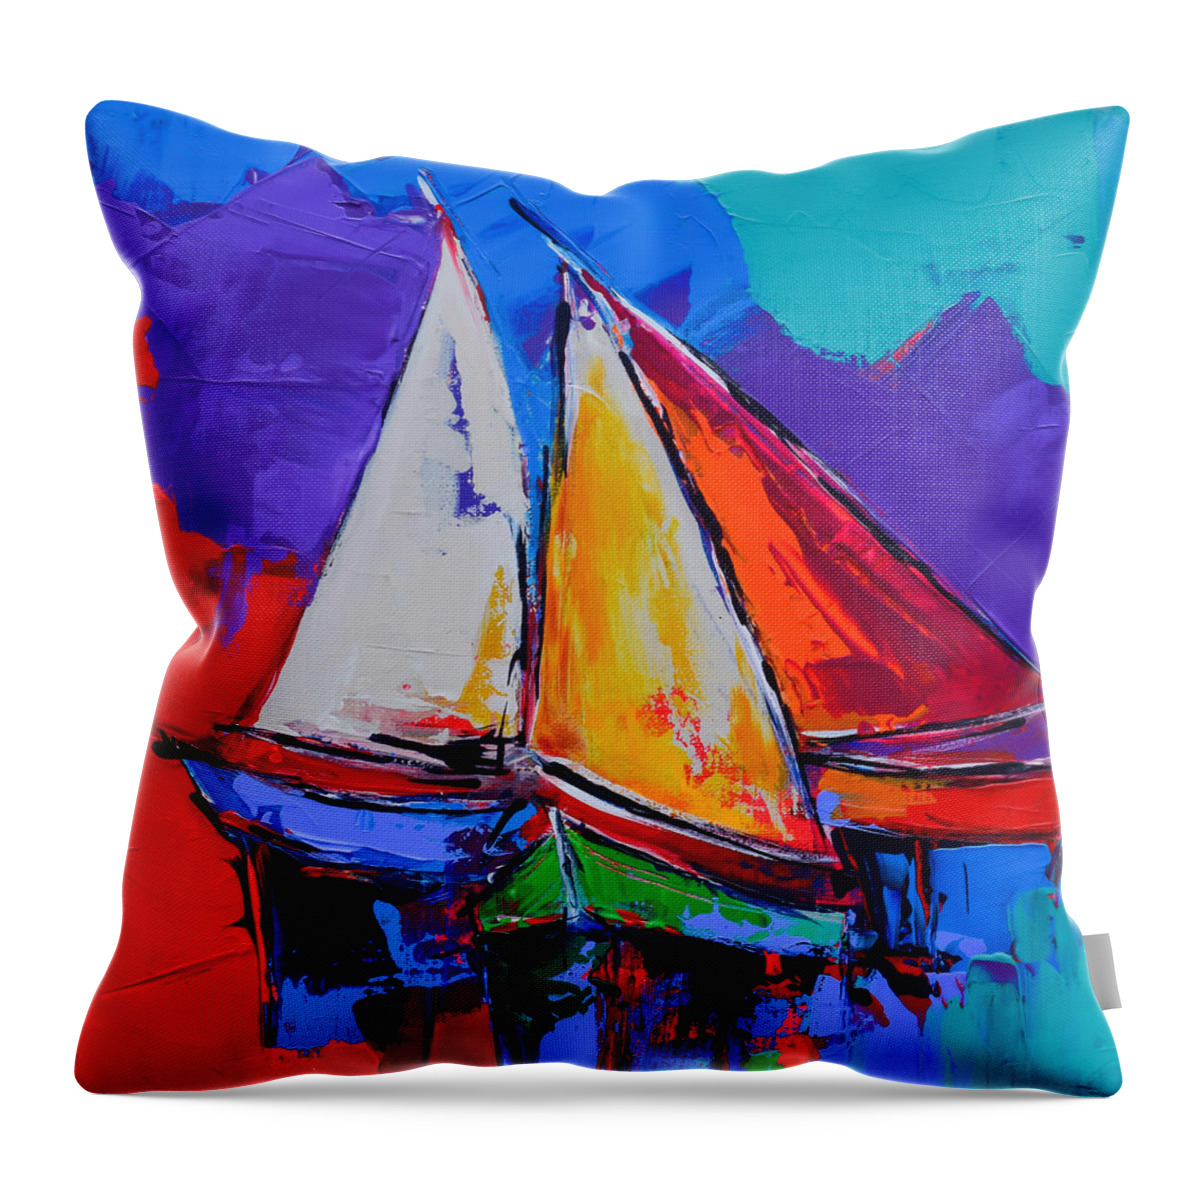 Sails Throw Pillow featuring the painting Sails Colors by Elise Palmigiani